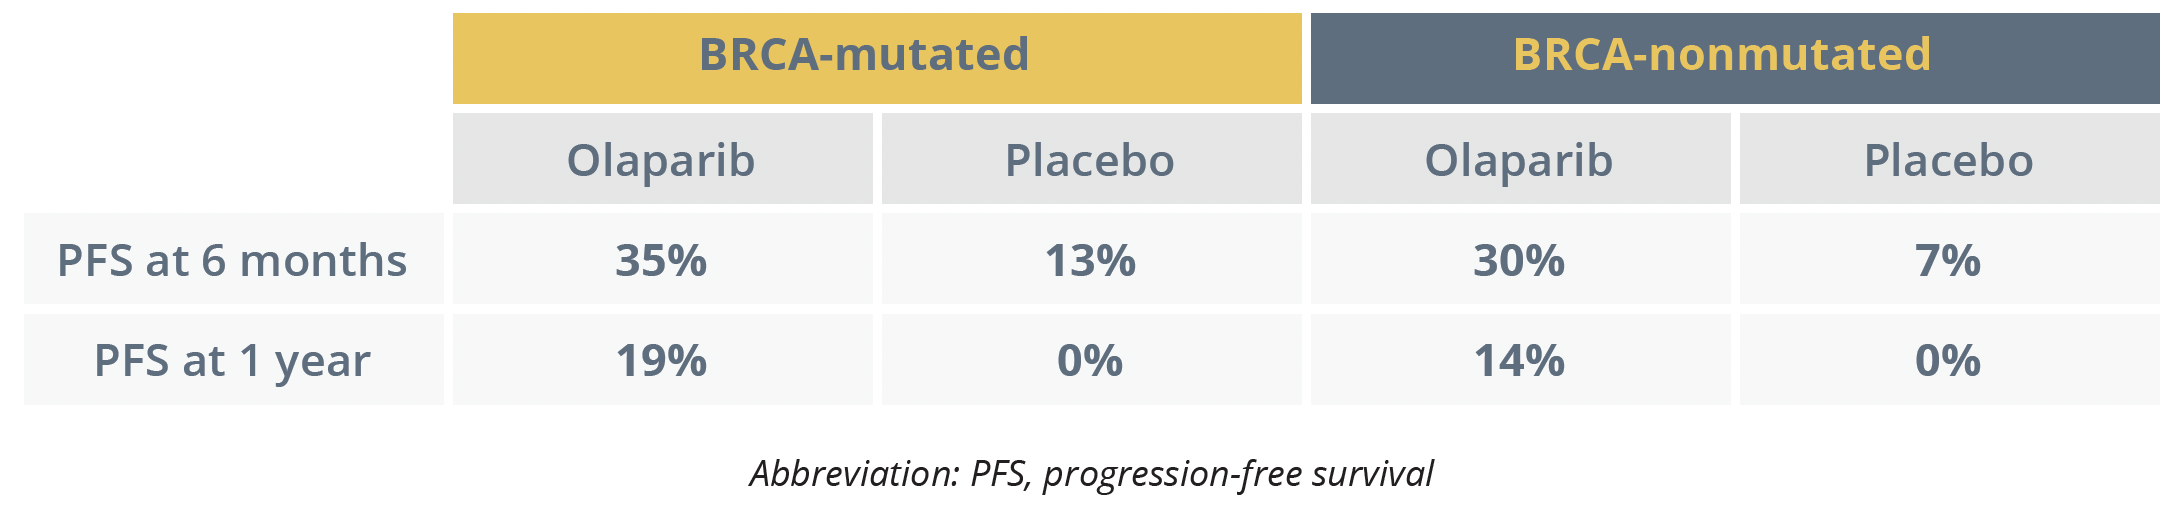 PFS benefits seen with olaparib versus placebo in both BRCA-mutated and nonmutated cohorts